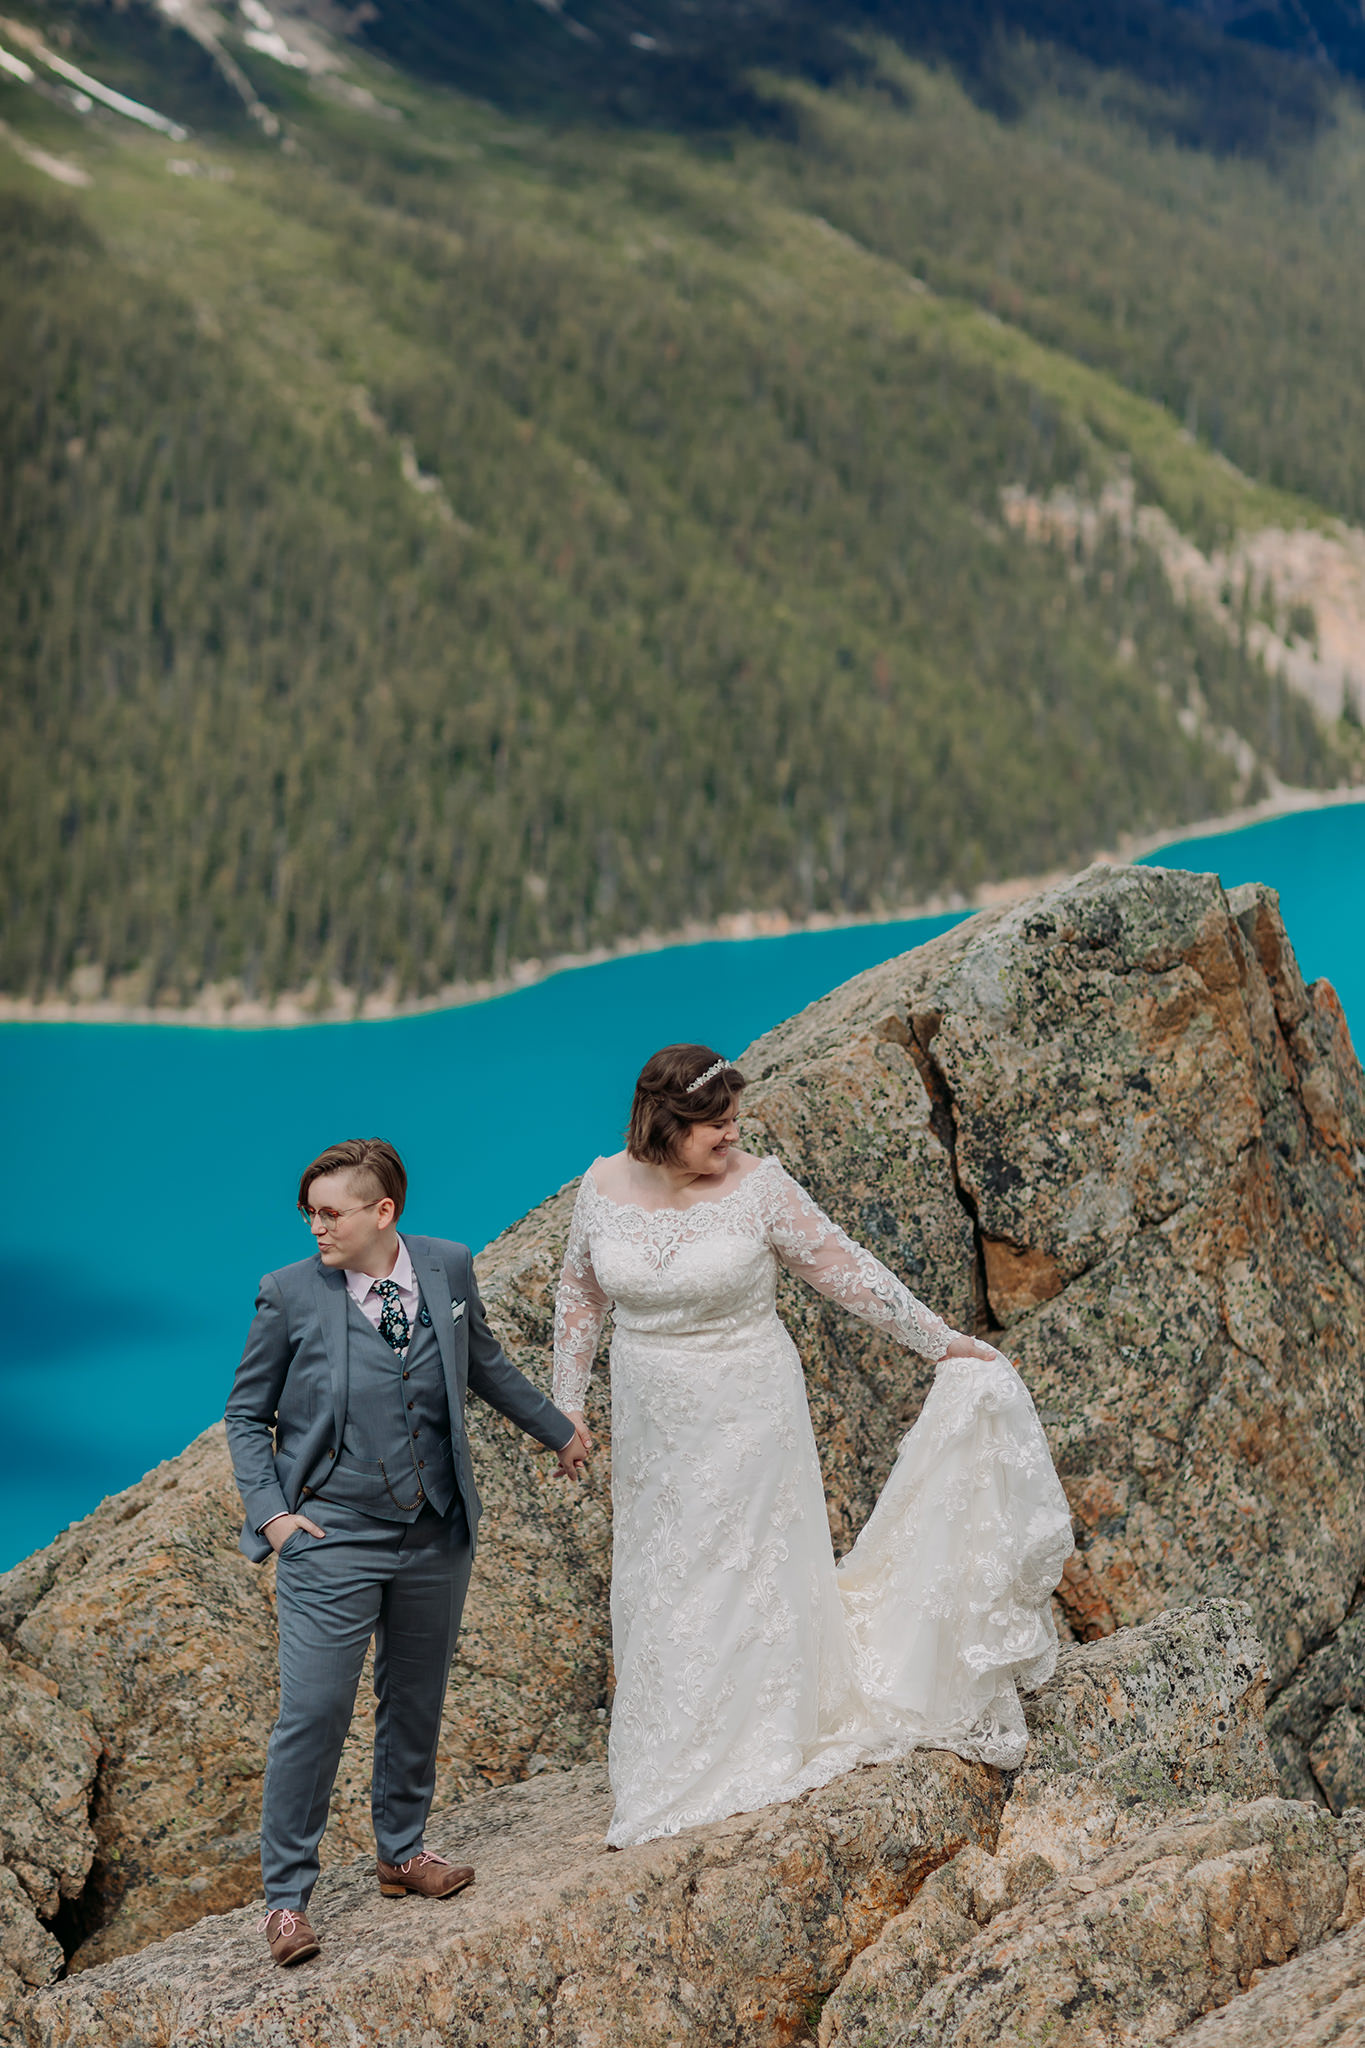 Icefields Parkway adventure session at rocky viewpoint at Peyto Lake with same-sex wedding. Mountain Wedding portraits photographed by ENV Photography. Gay friendly. LGBTQ friendly wedding & elopement photographer.